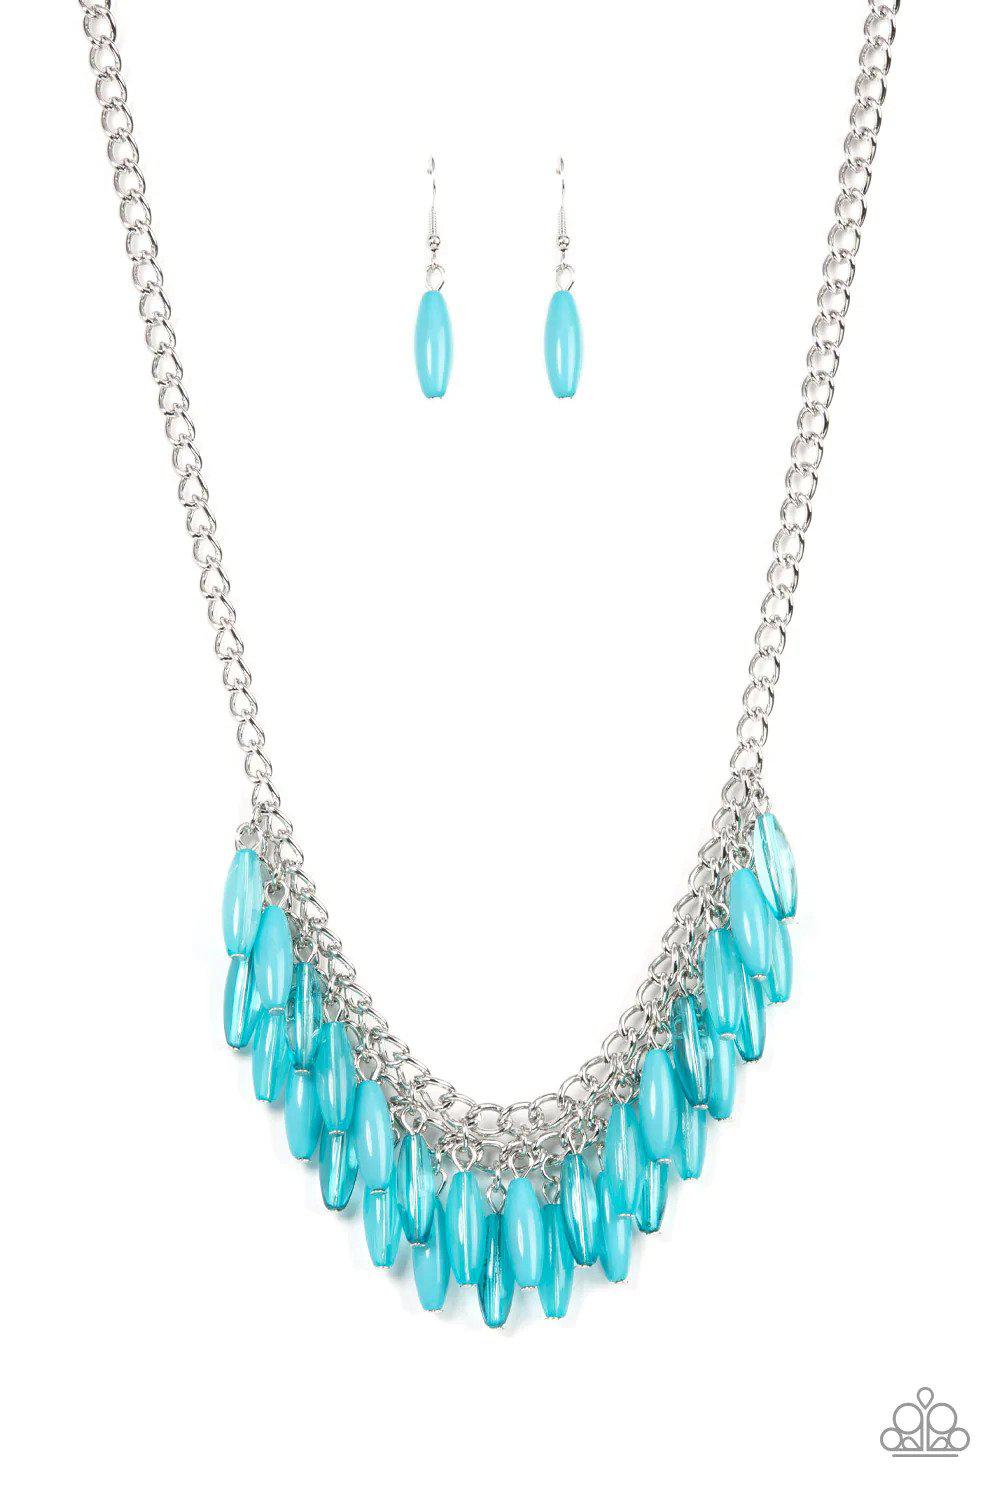 Beach House Hustle Blue Necklace - Paparazzi Accessories- lightbox - CarasShop.com - $5 Jewelry by Cara Jewels